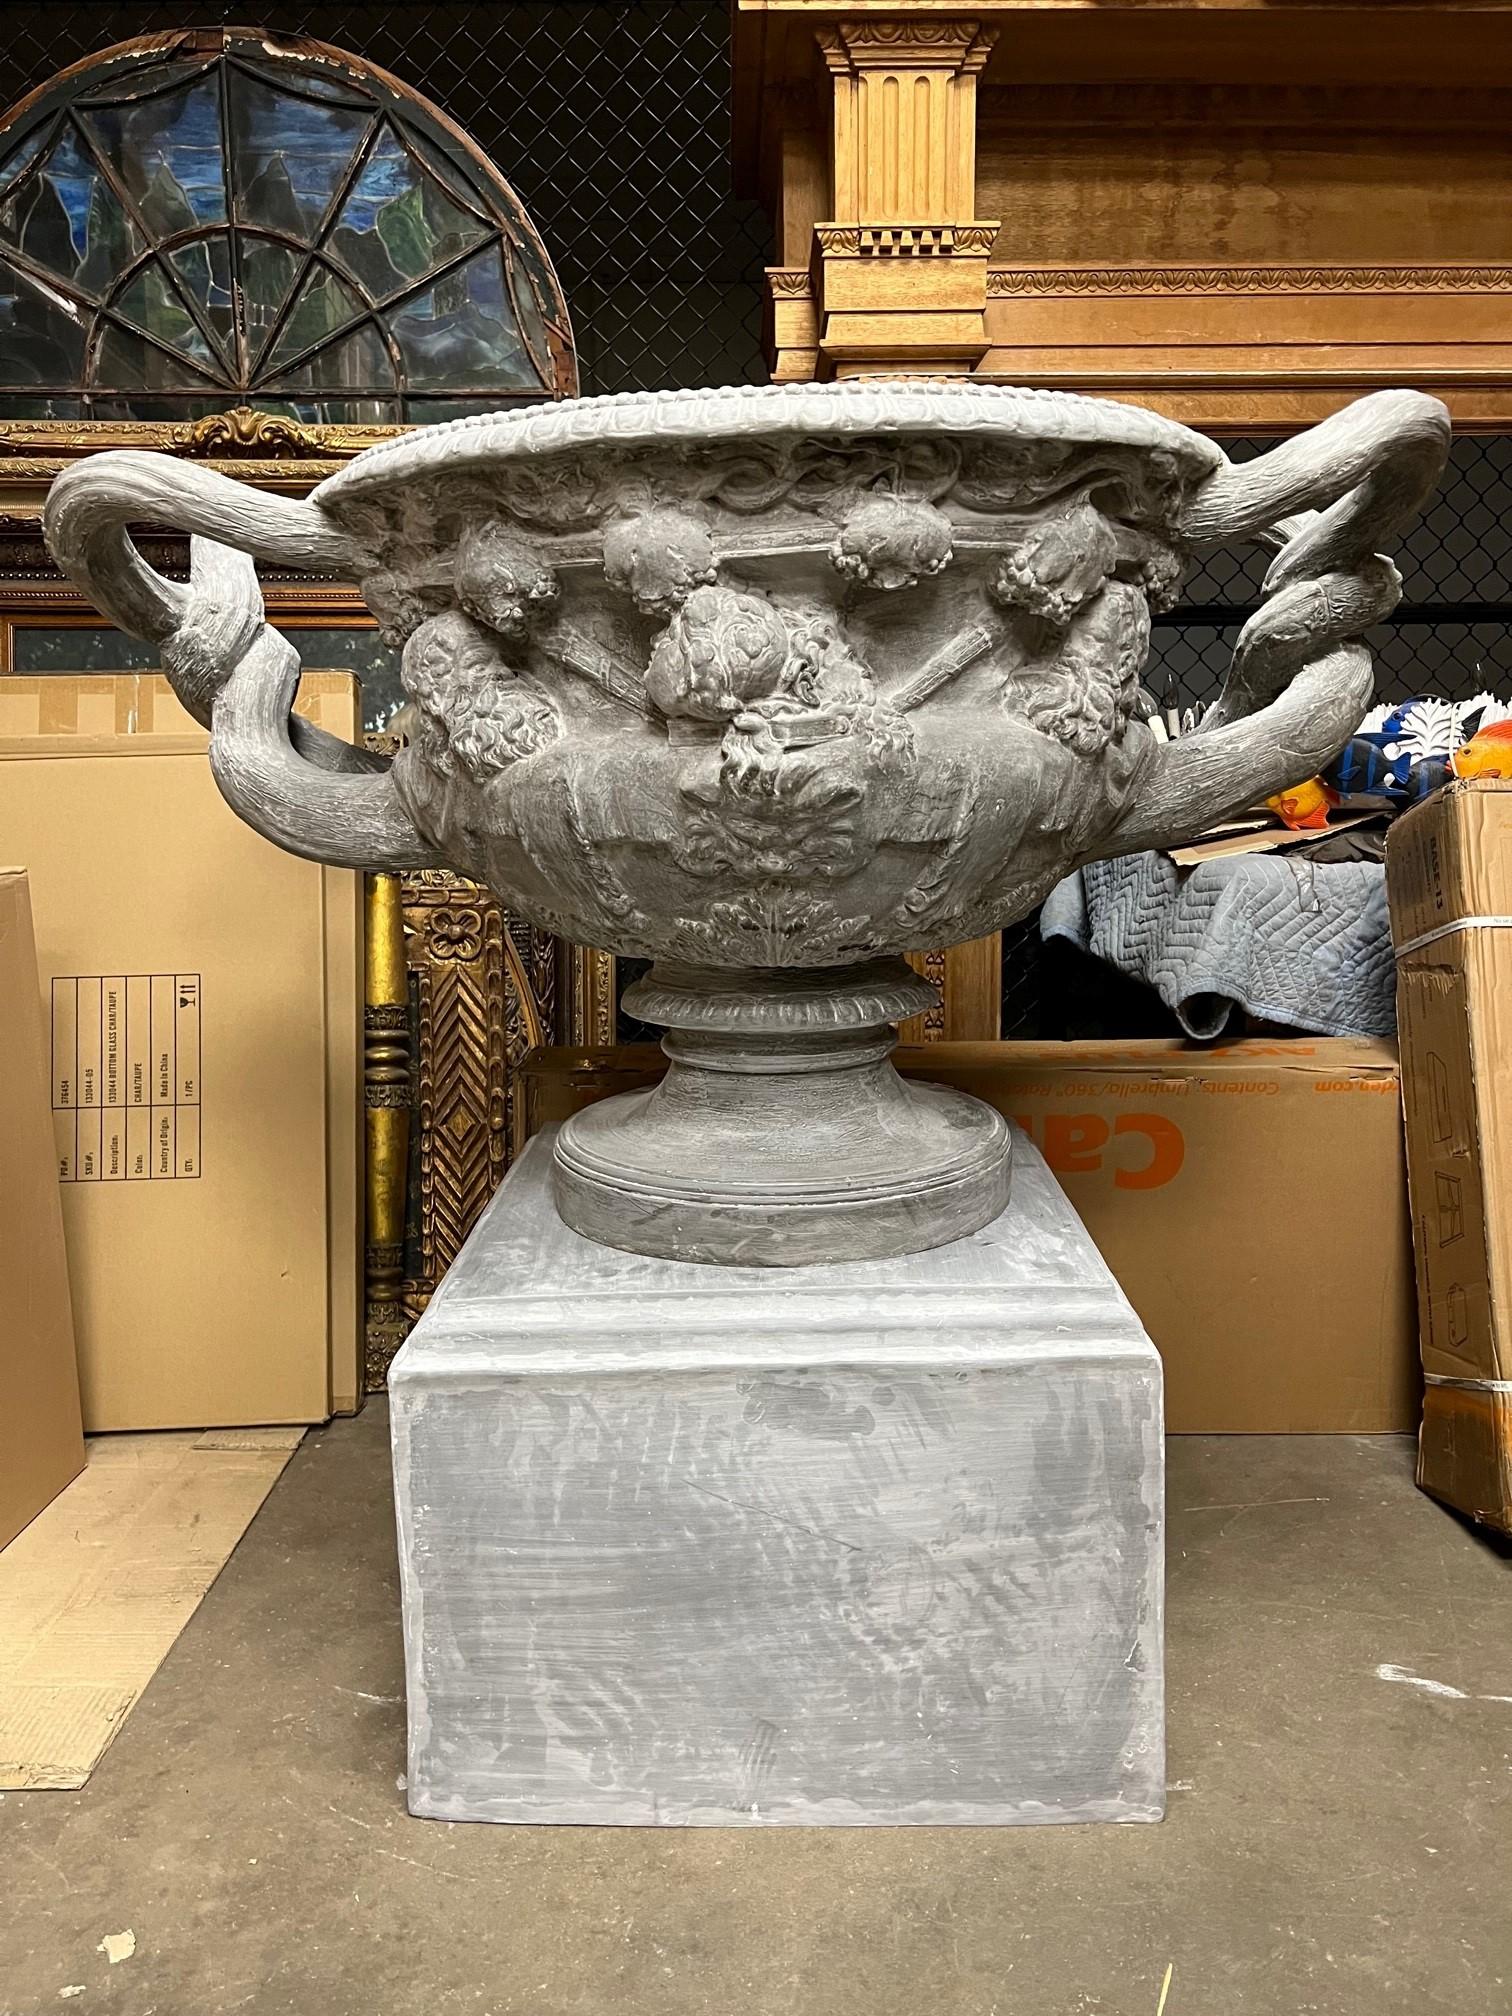 Fabulous Large fiberglass handle urn and pedestal, a reproduction from a vintage terracotta urn and pedestal. I have the original terracotta urn and pedestal also available on 1stDibs for $14,000 from England. The base is 27